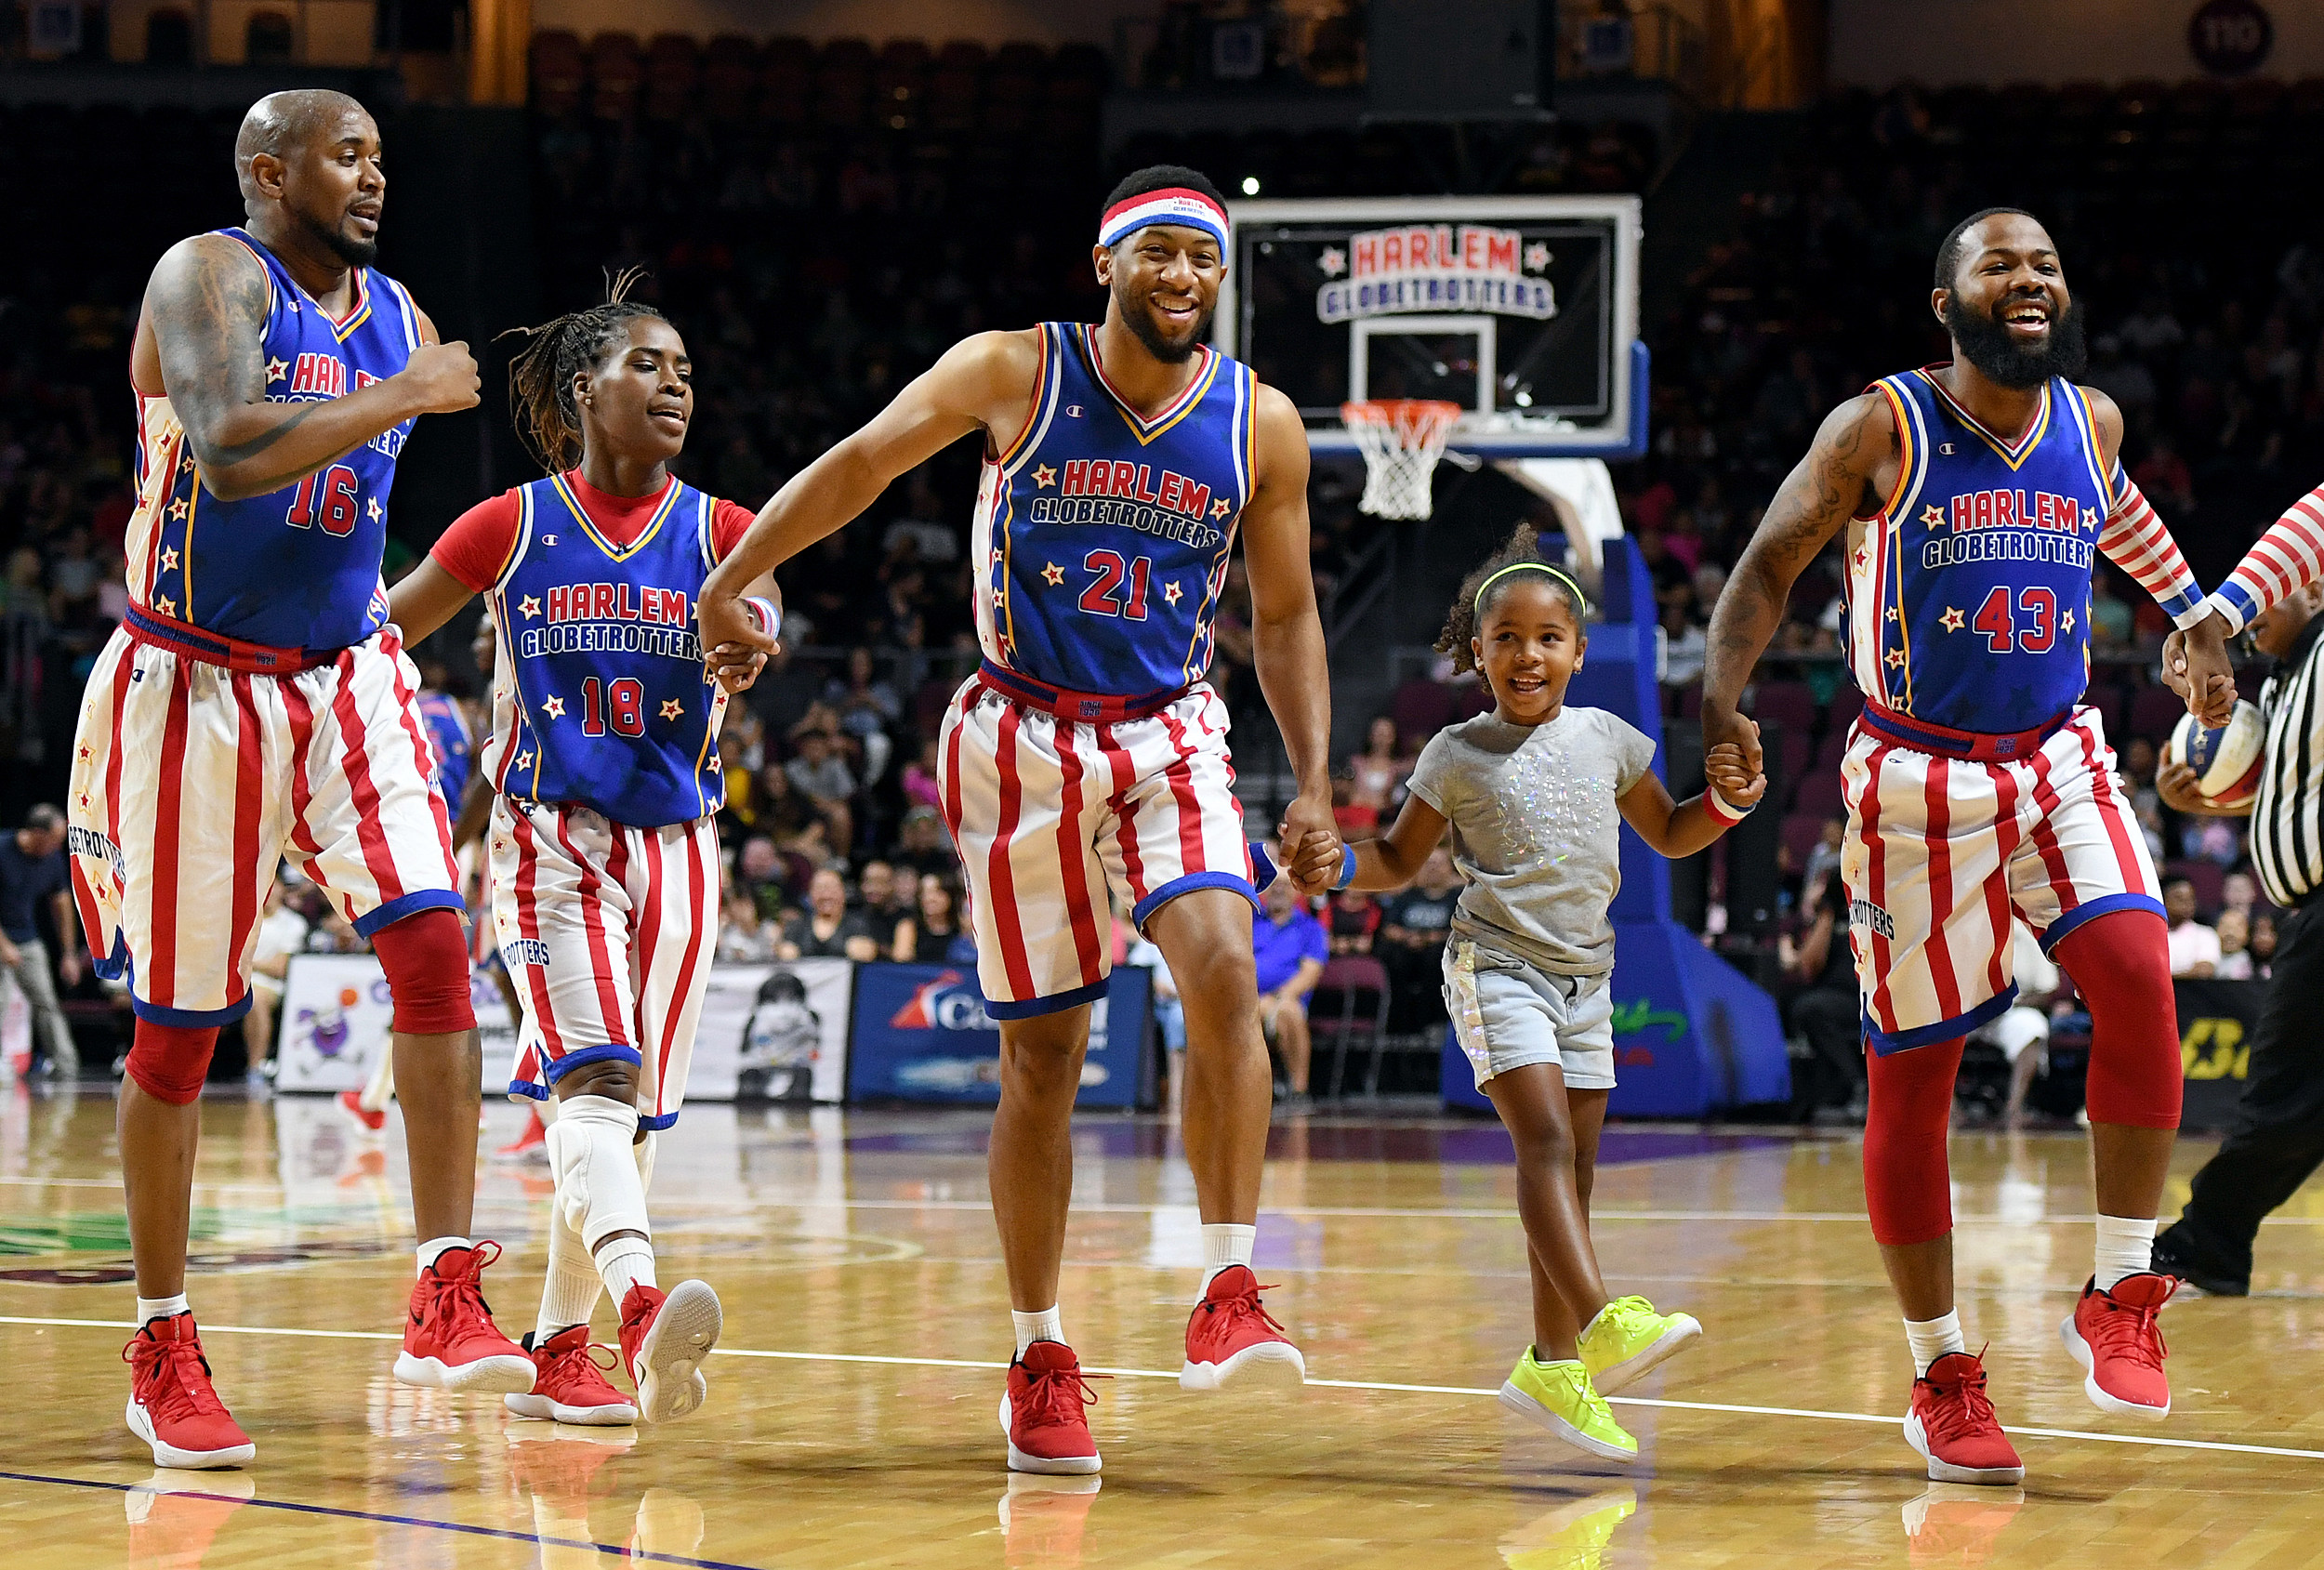 HARLEM GLOBETROTTERS RETURN TO THE COURT WITH UNPRECEDENTED